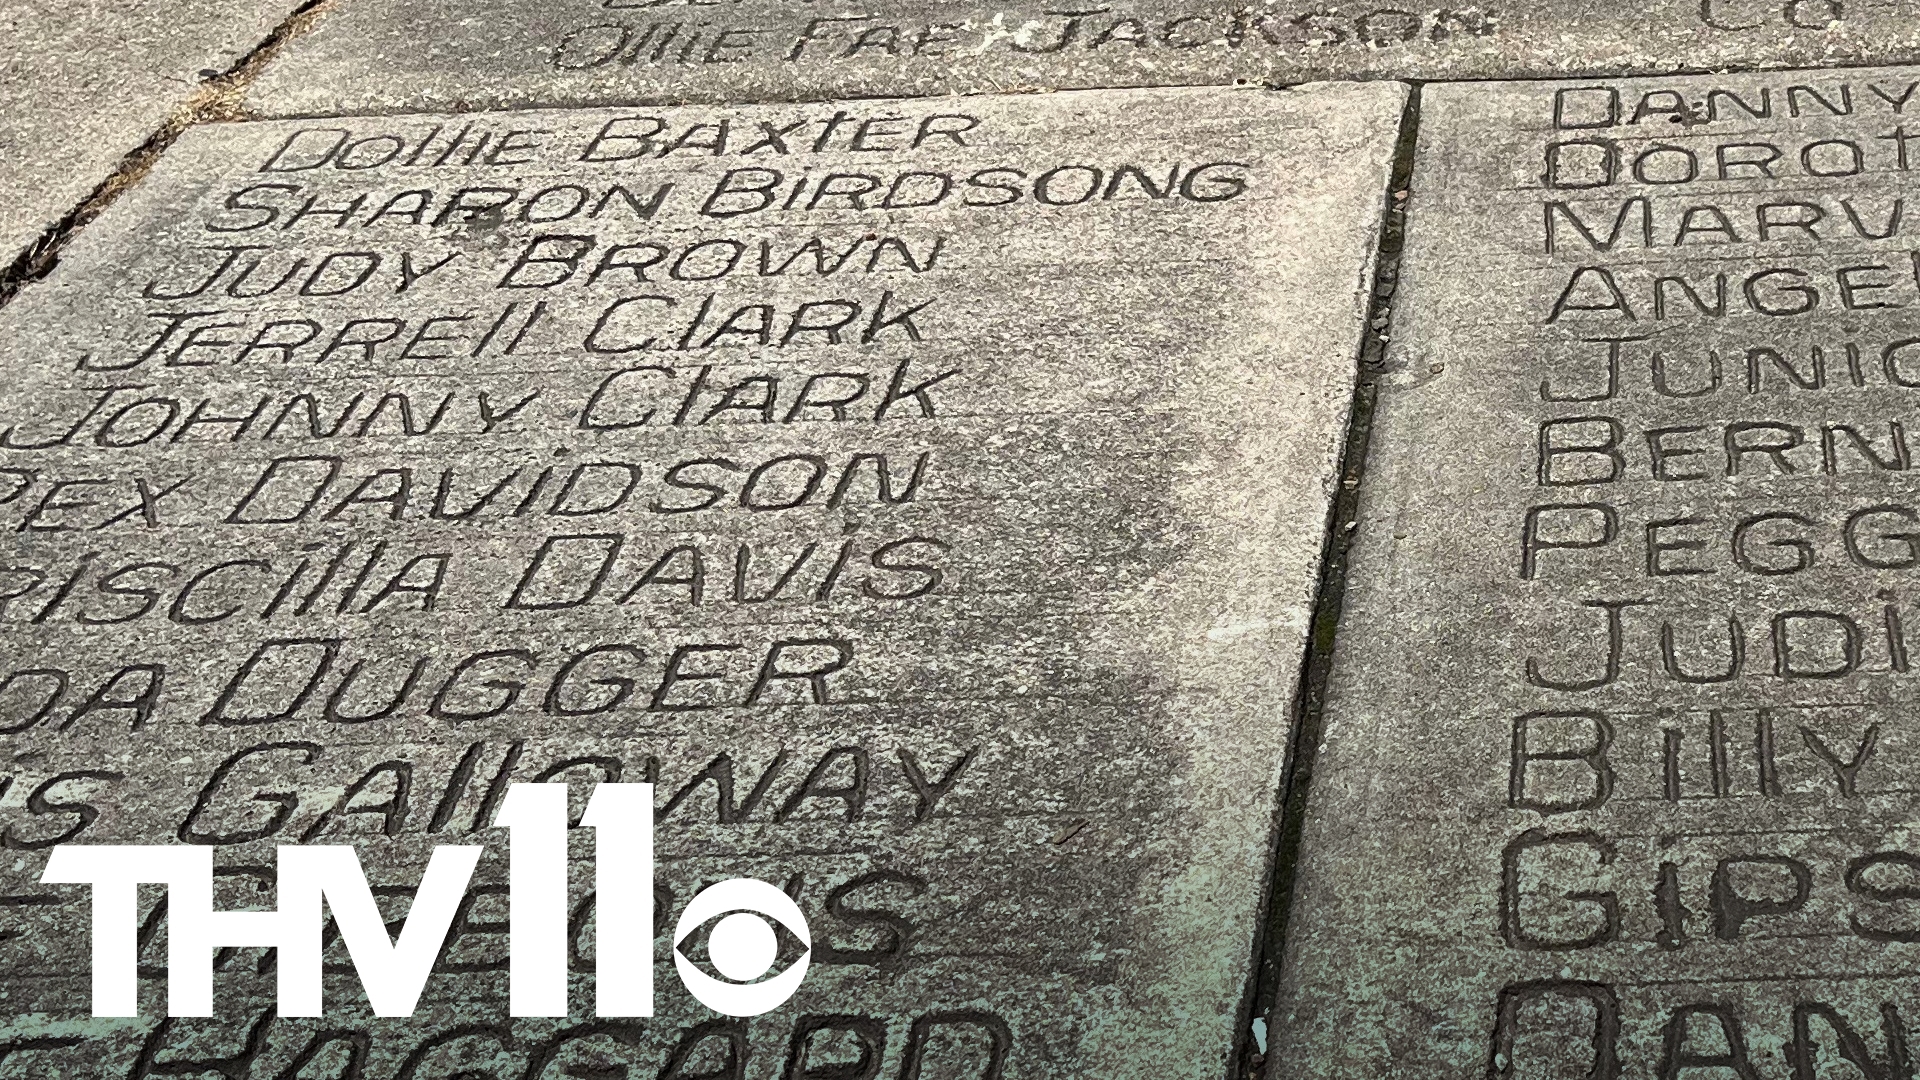 Some Heber Springs alumni are sharing their frustrations over having their names that are etched into the sidewalks removed due to renovations being made on campus.